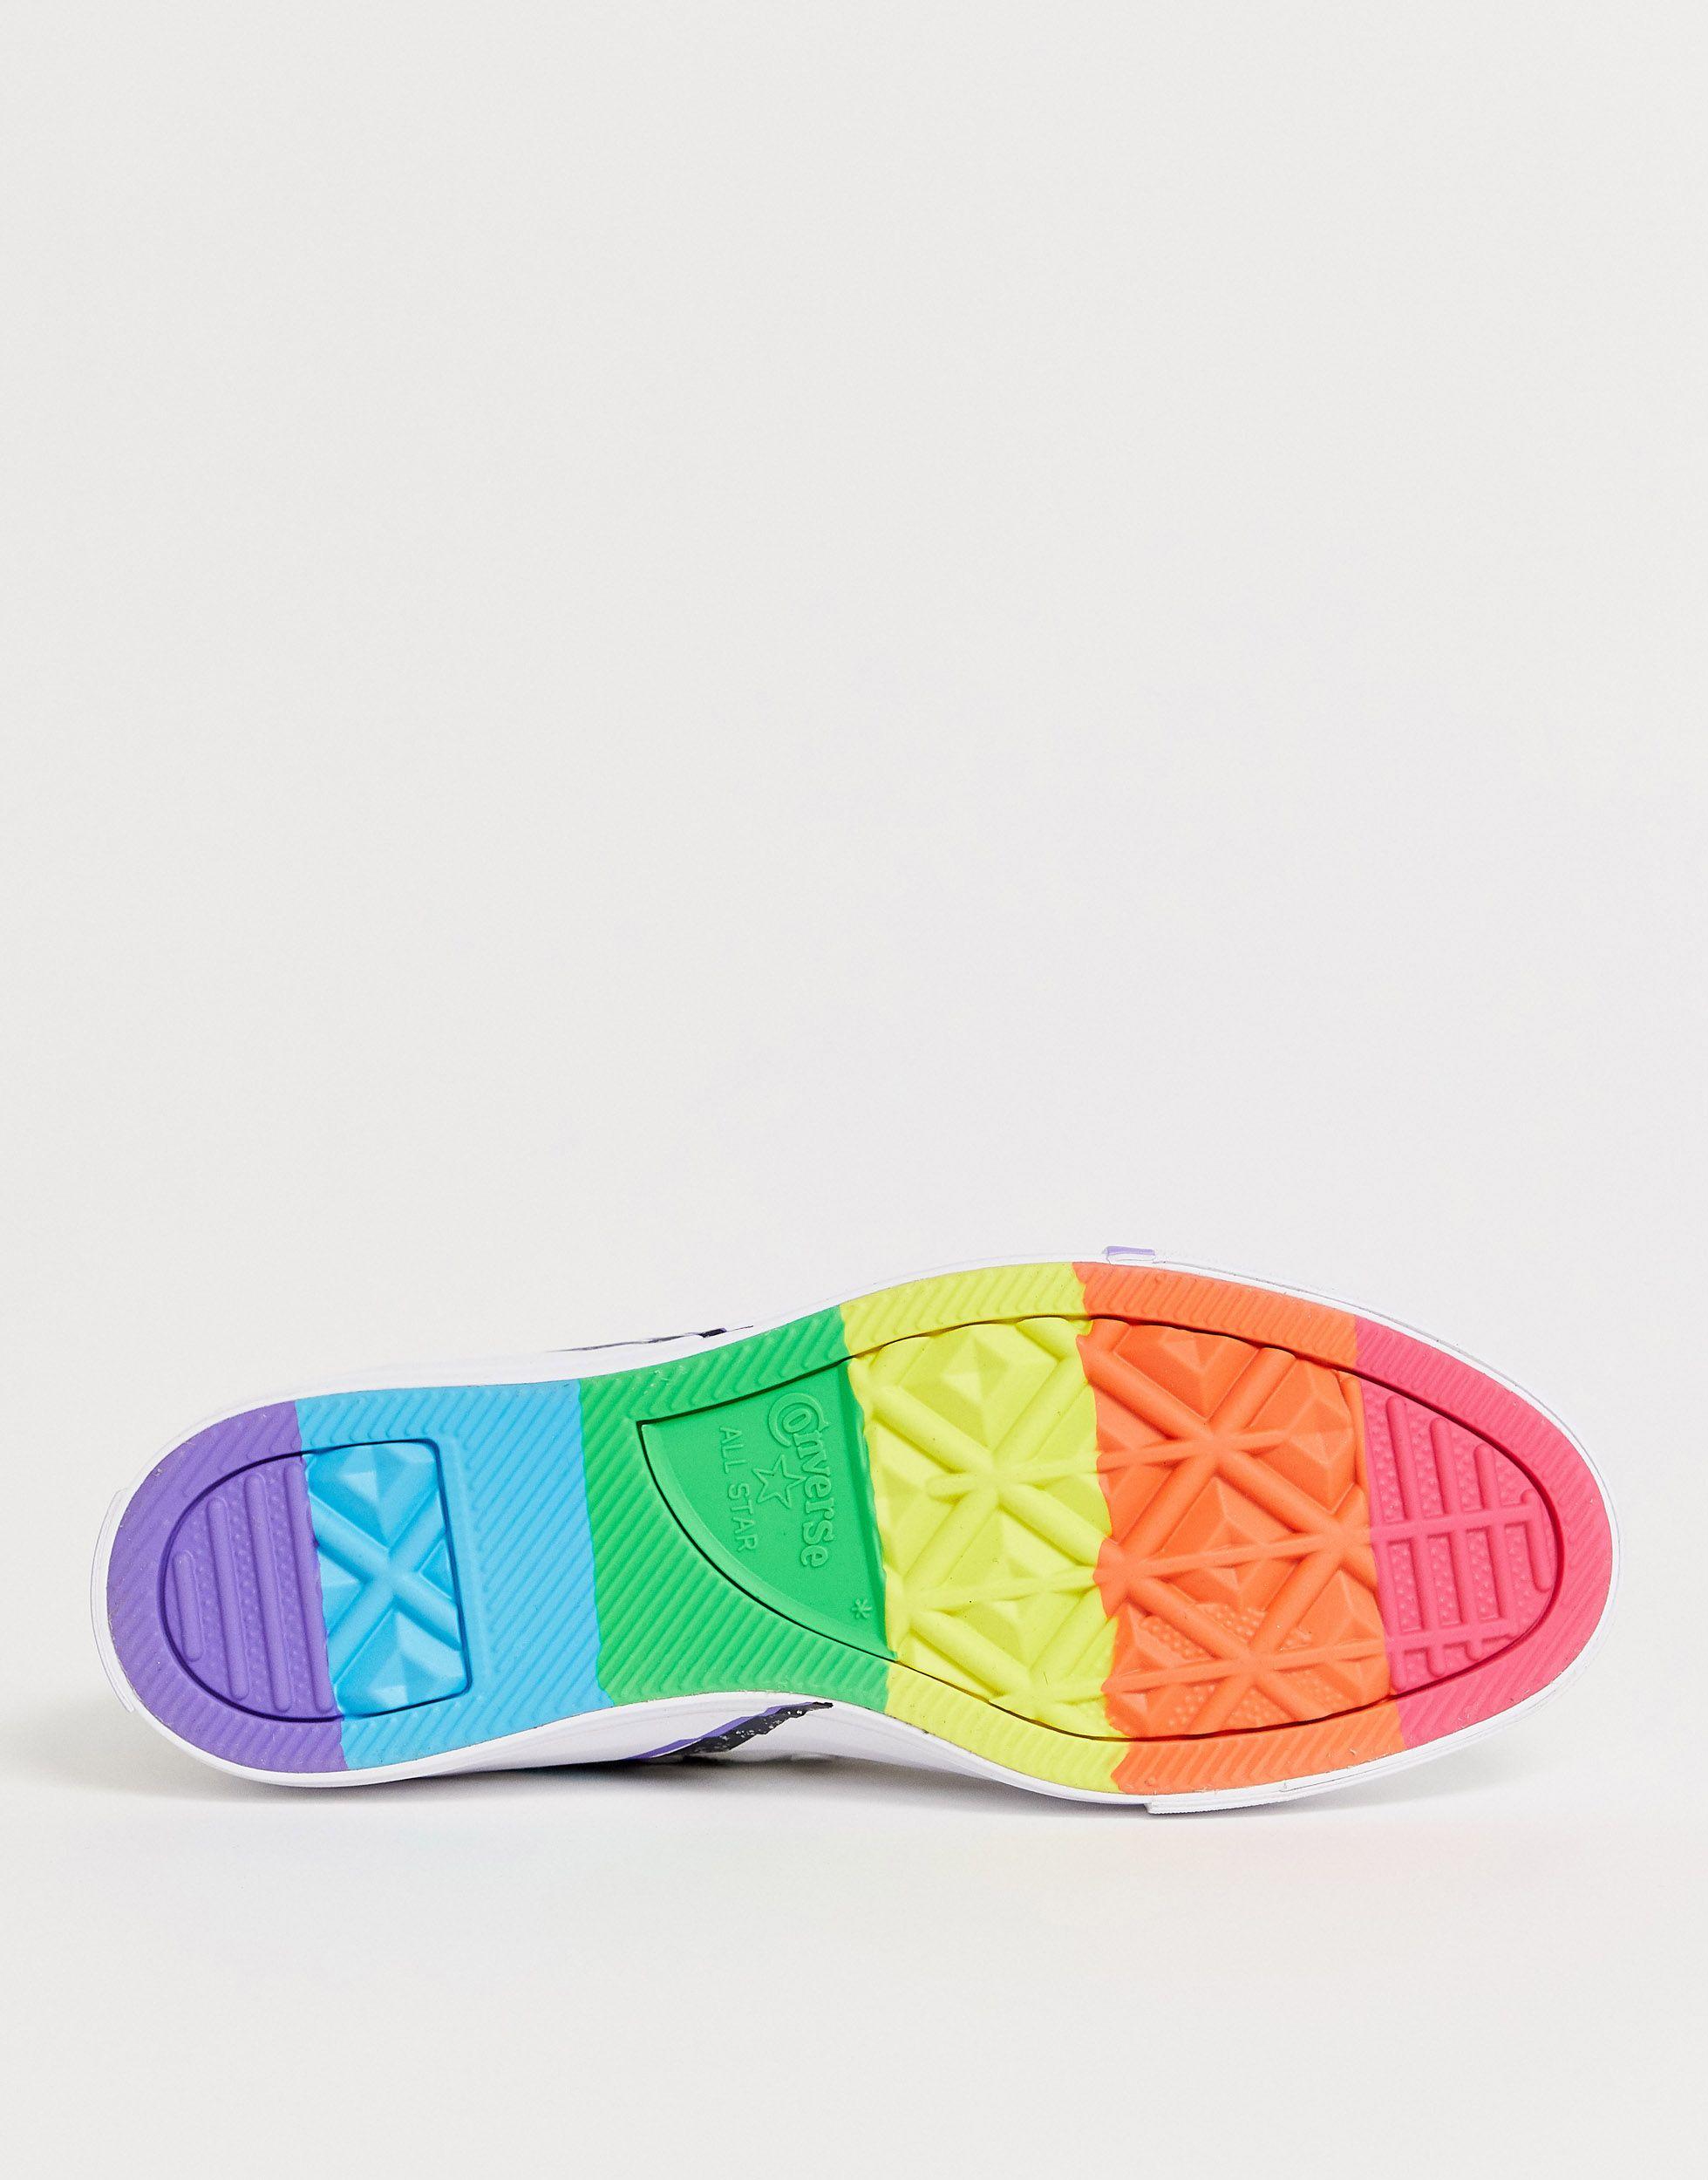 Converse Pride Chuck Taylor Hi All Star And Rainbow Lightning Bolt Trainers  in White | Lyst